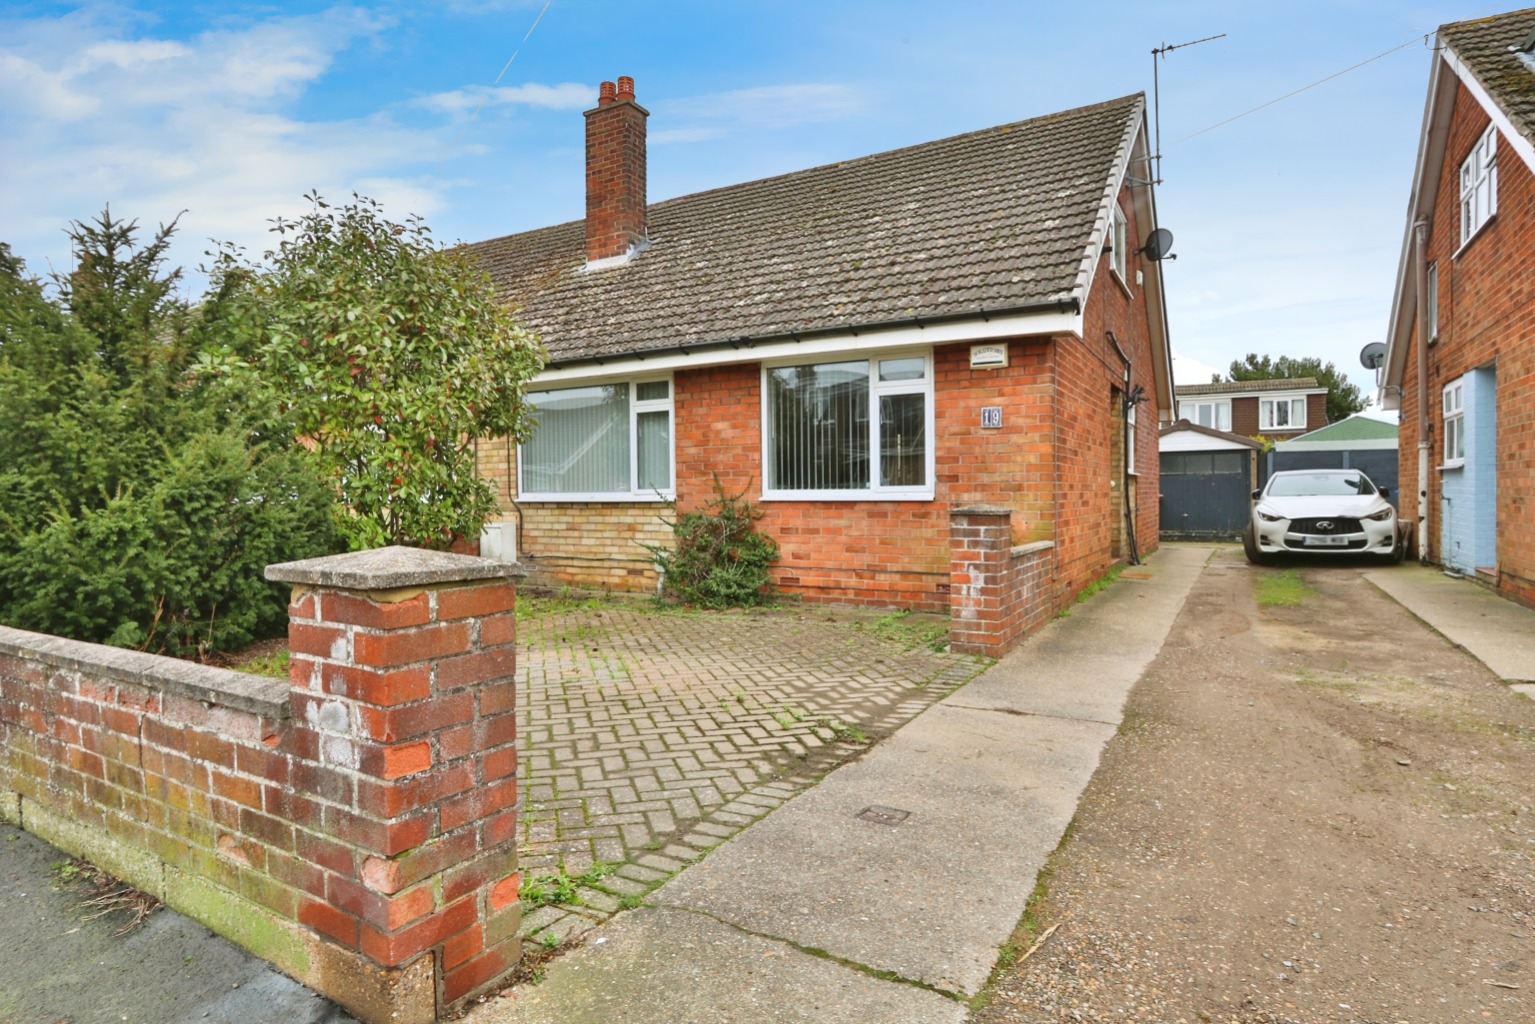 3 bed semi-detached bungalow for sale in Stockholm Road, Hull - Property Image 1